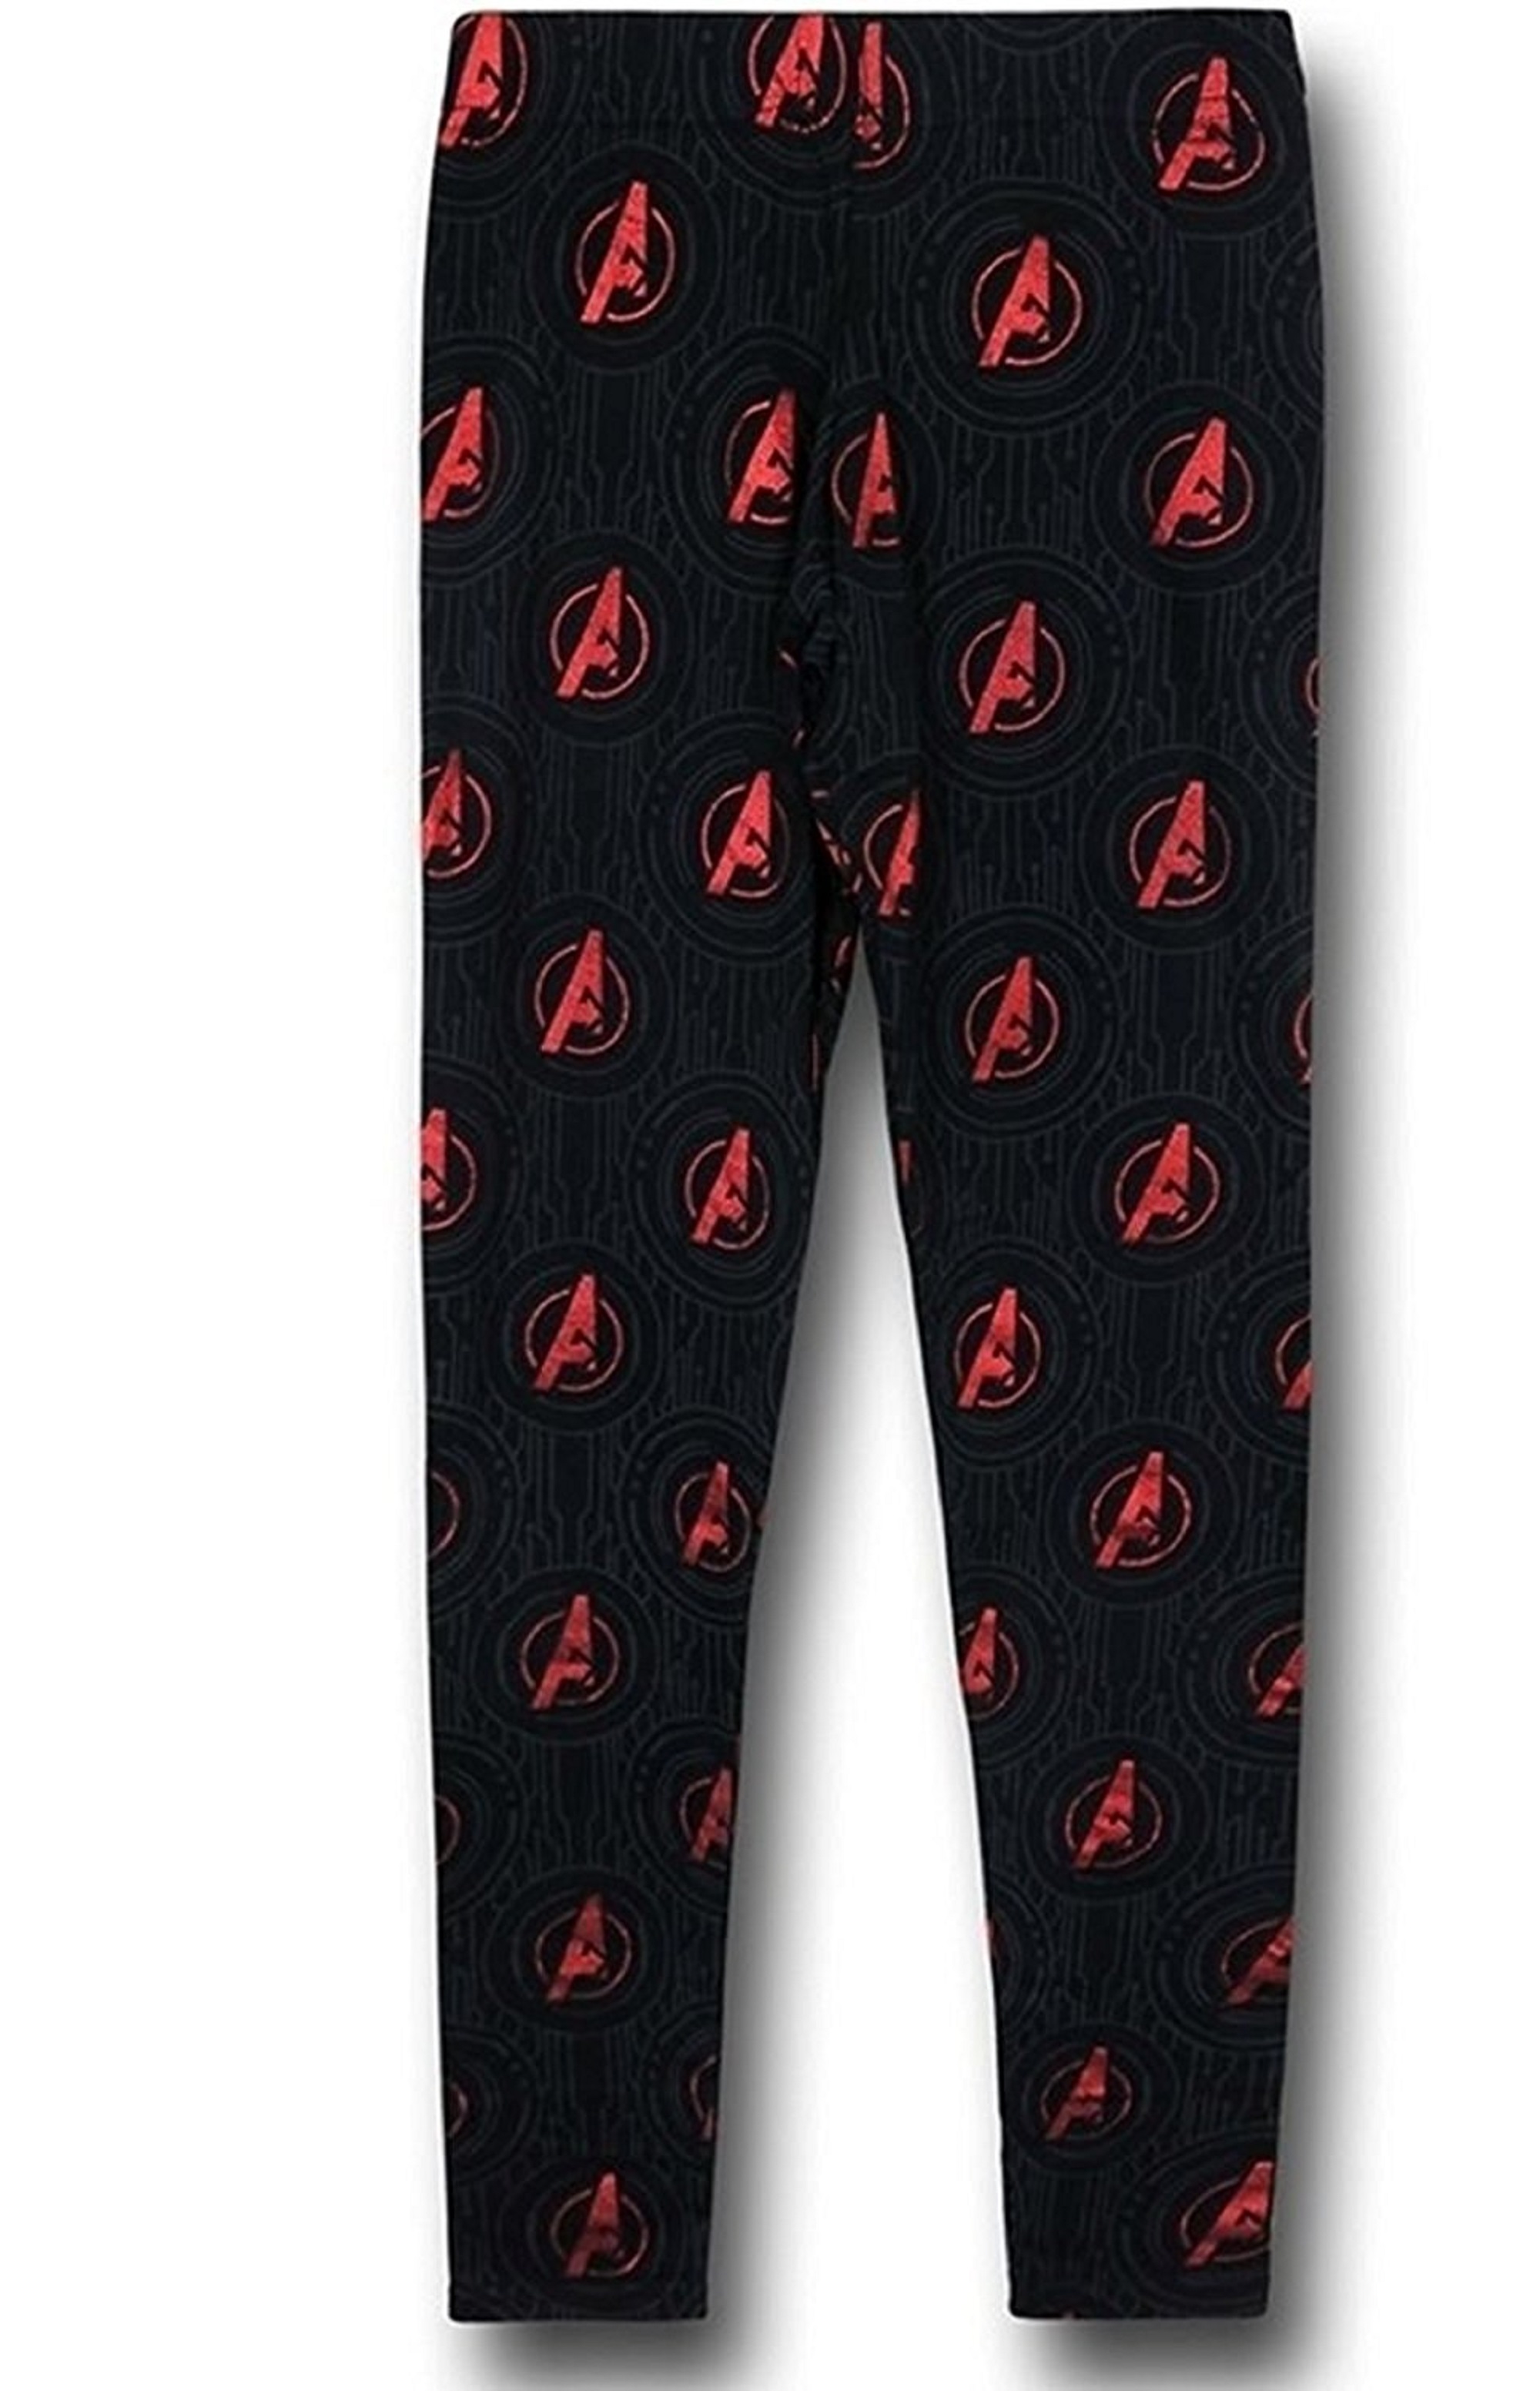 Officially Licensed Marvel Avengers Age of Ultron Symbol Ankle-Length Teen Juniors Leggings (Size Large) - image 1 of 4